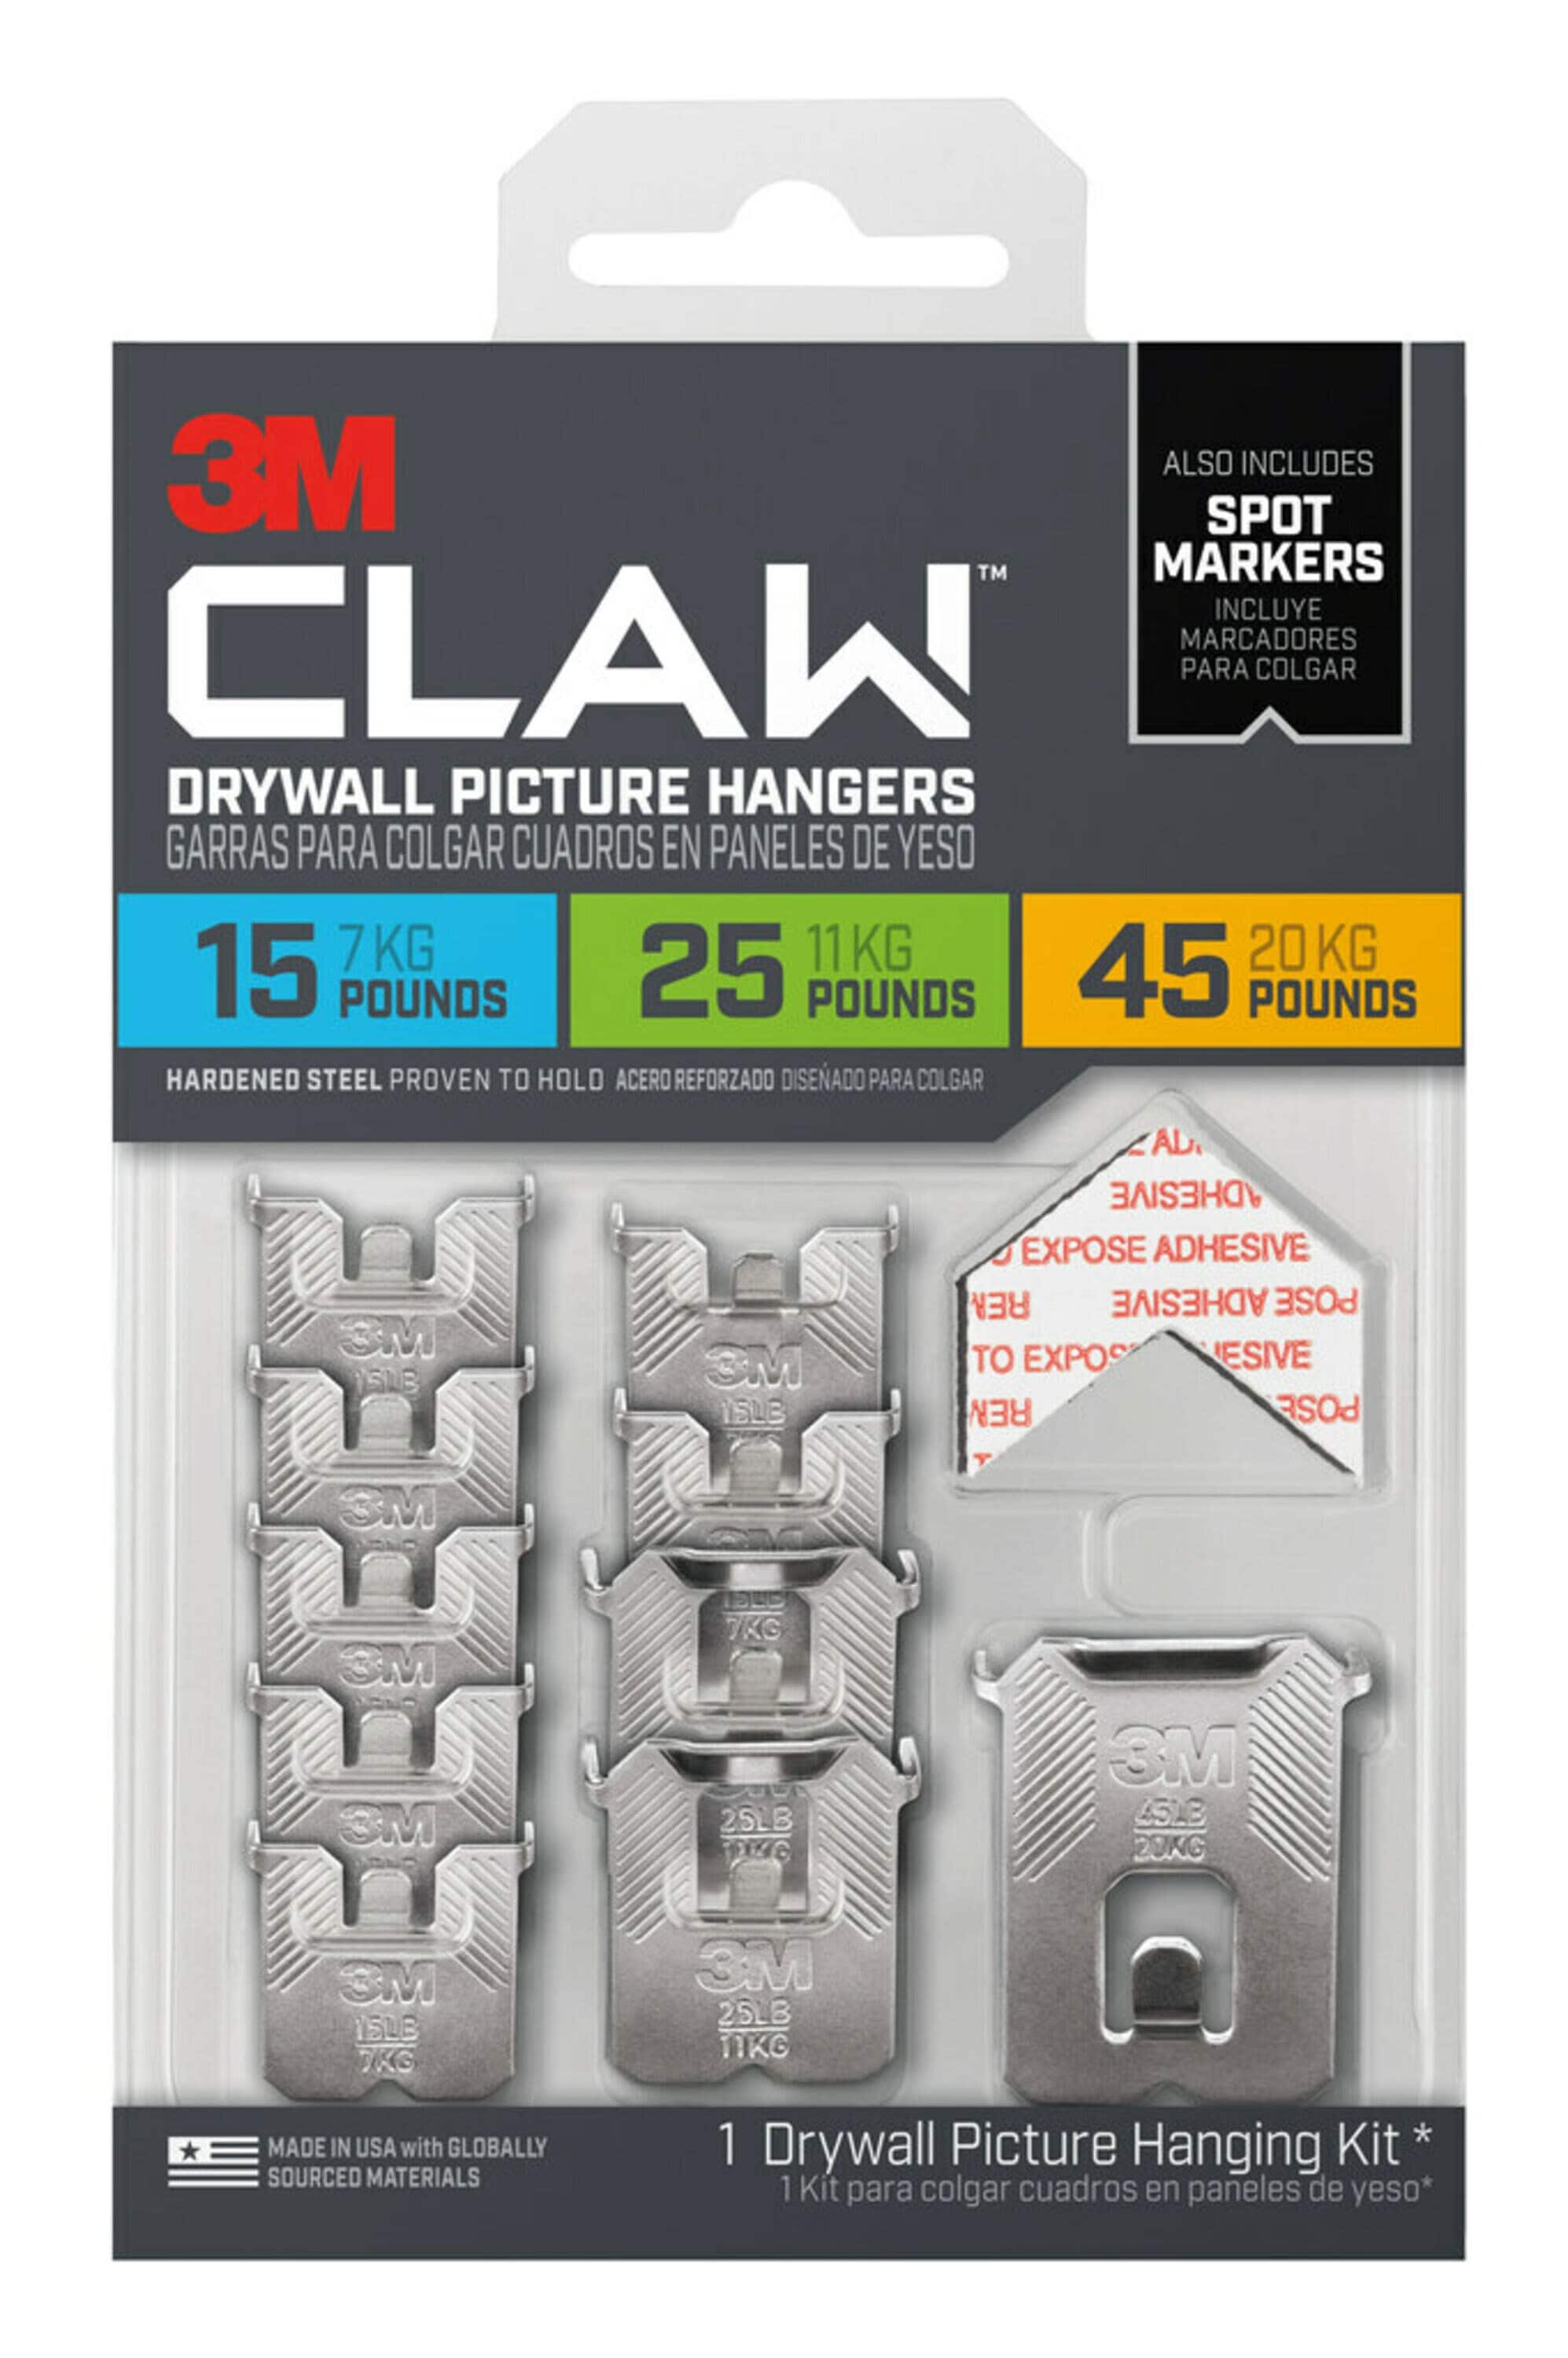 3M CLAW Drywall Picture Hangers 10-Pack Stainless Steel Hanging